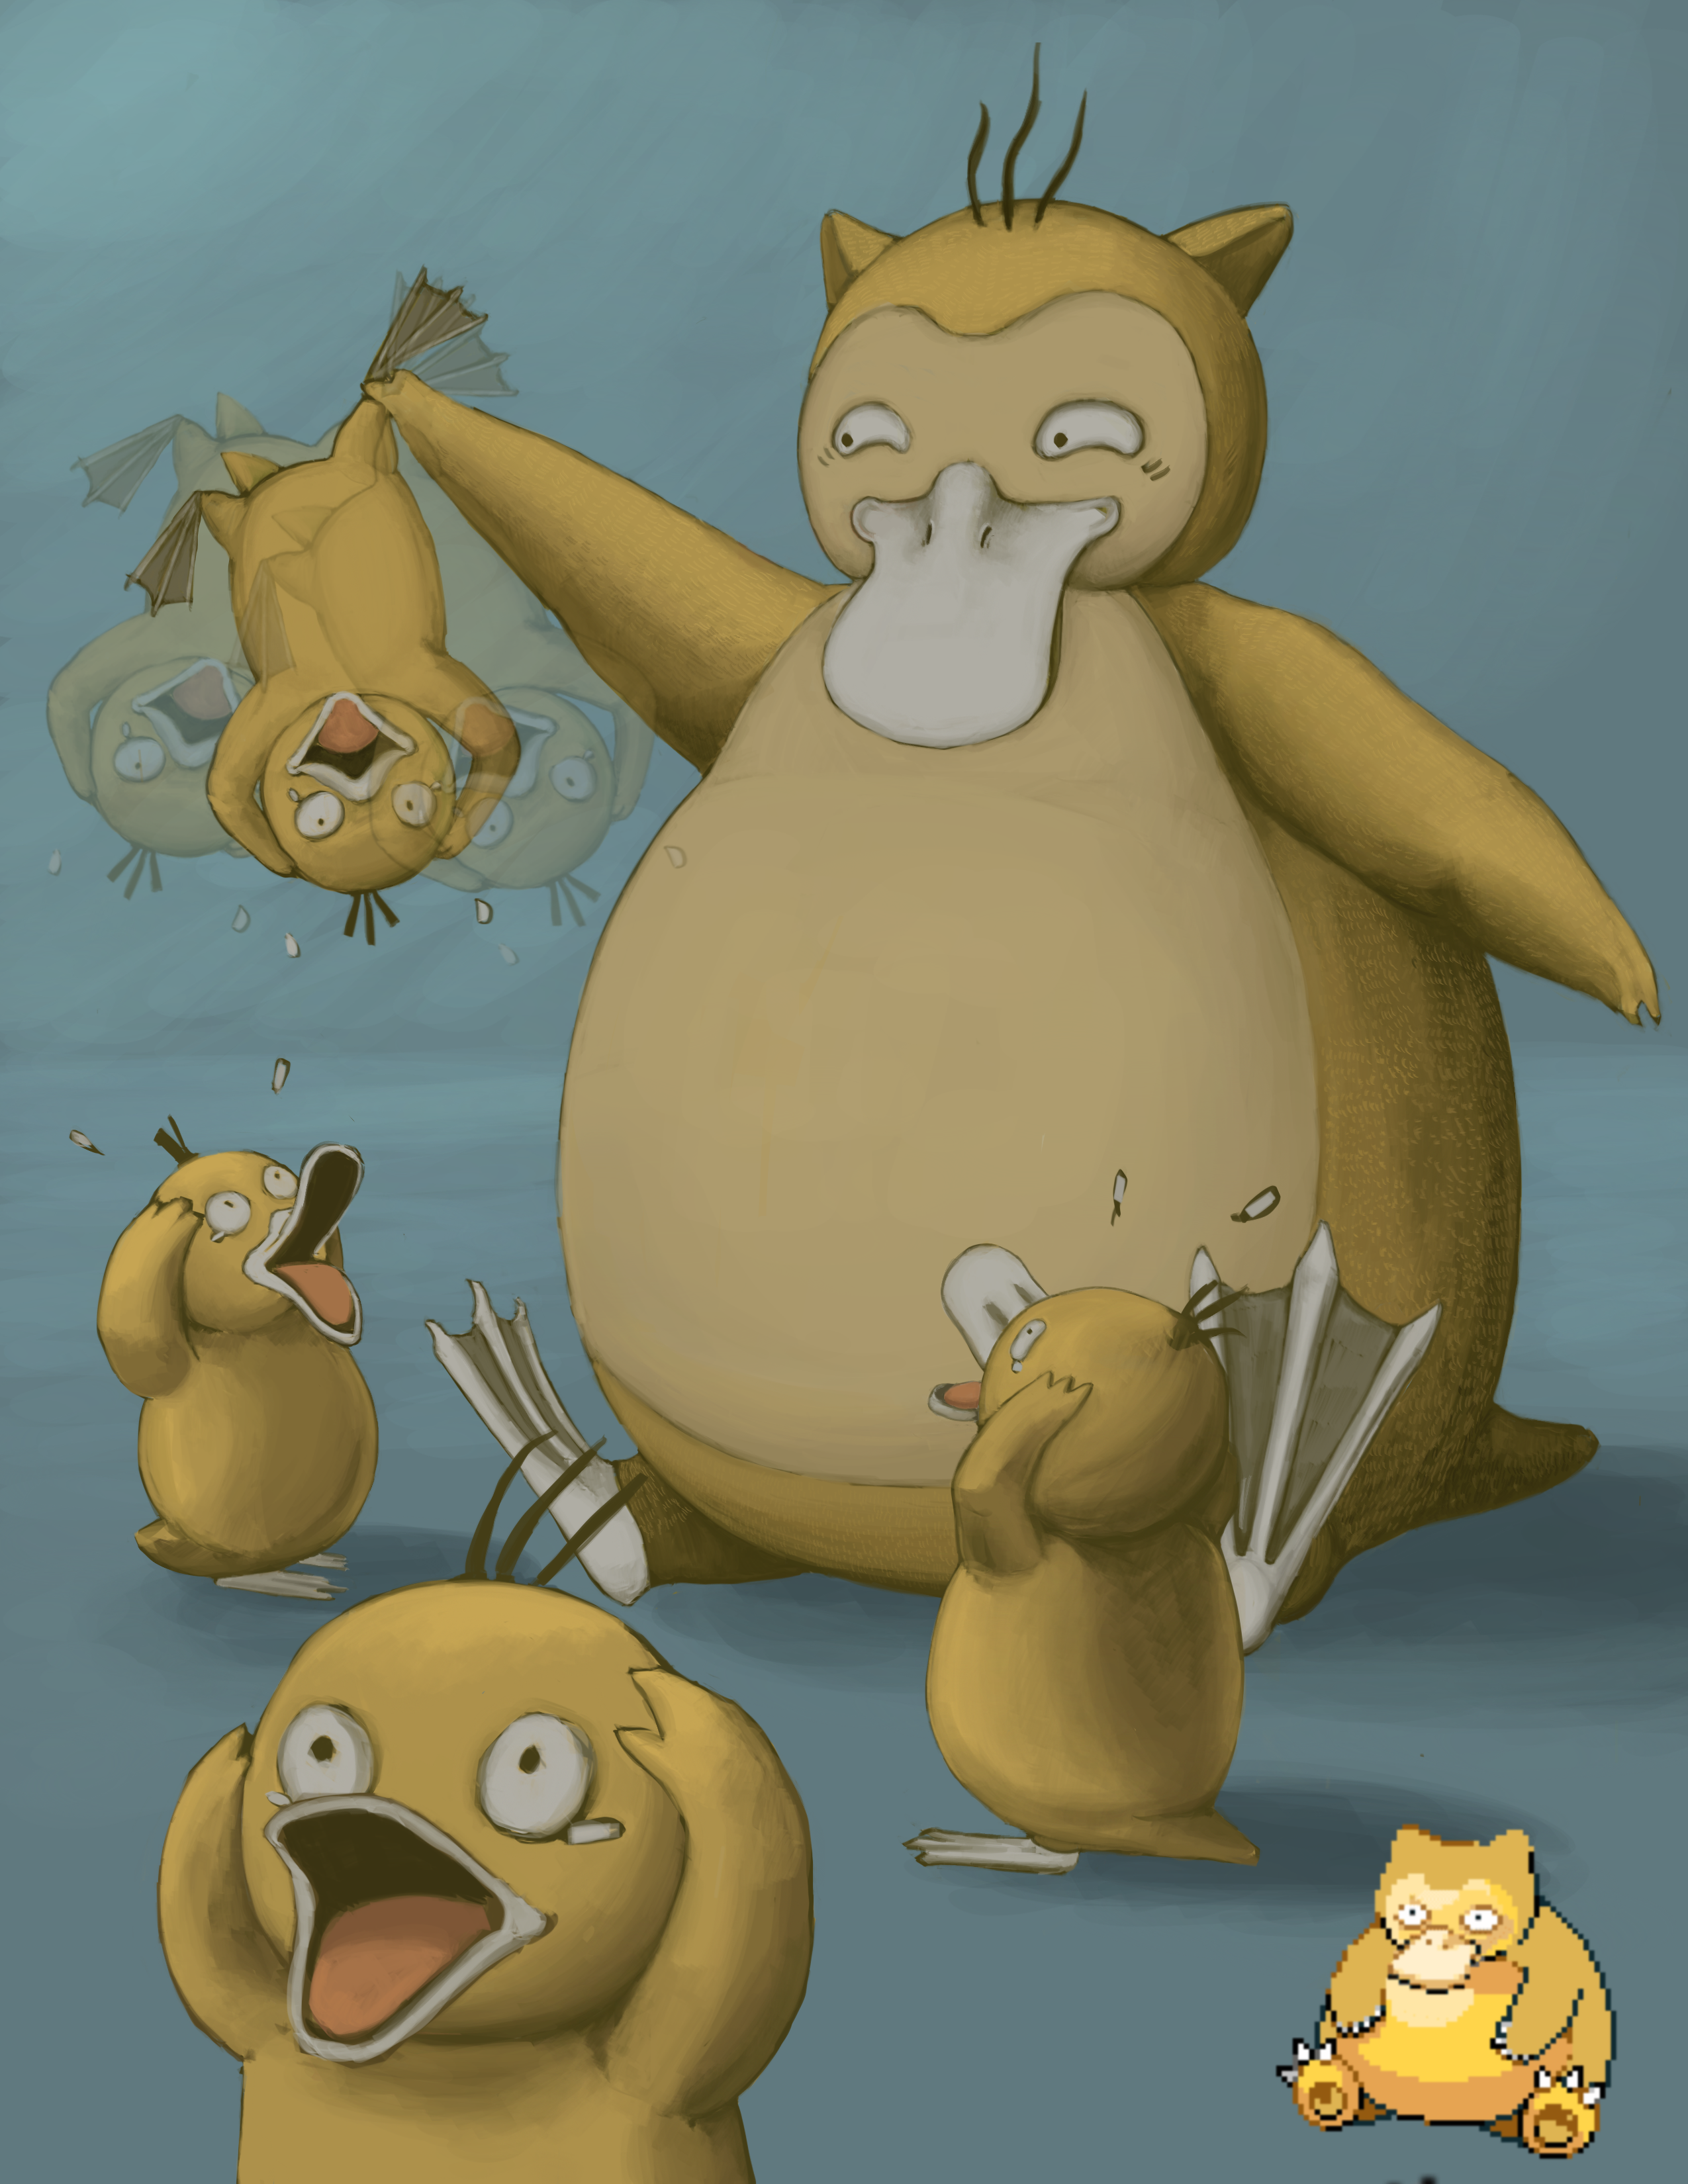 Psylax. The fear is real. Pokemon fusion of Snorlax and Psyduck